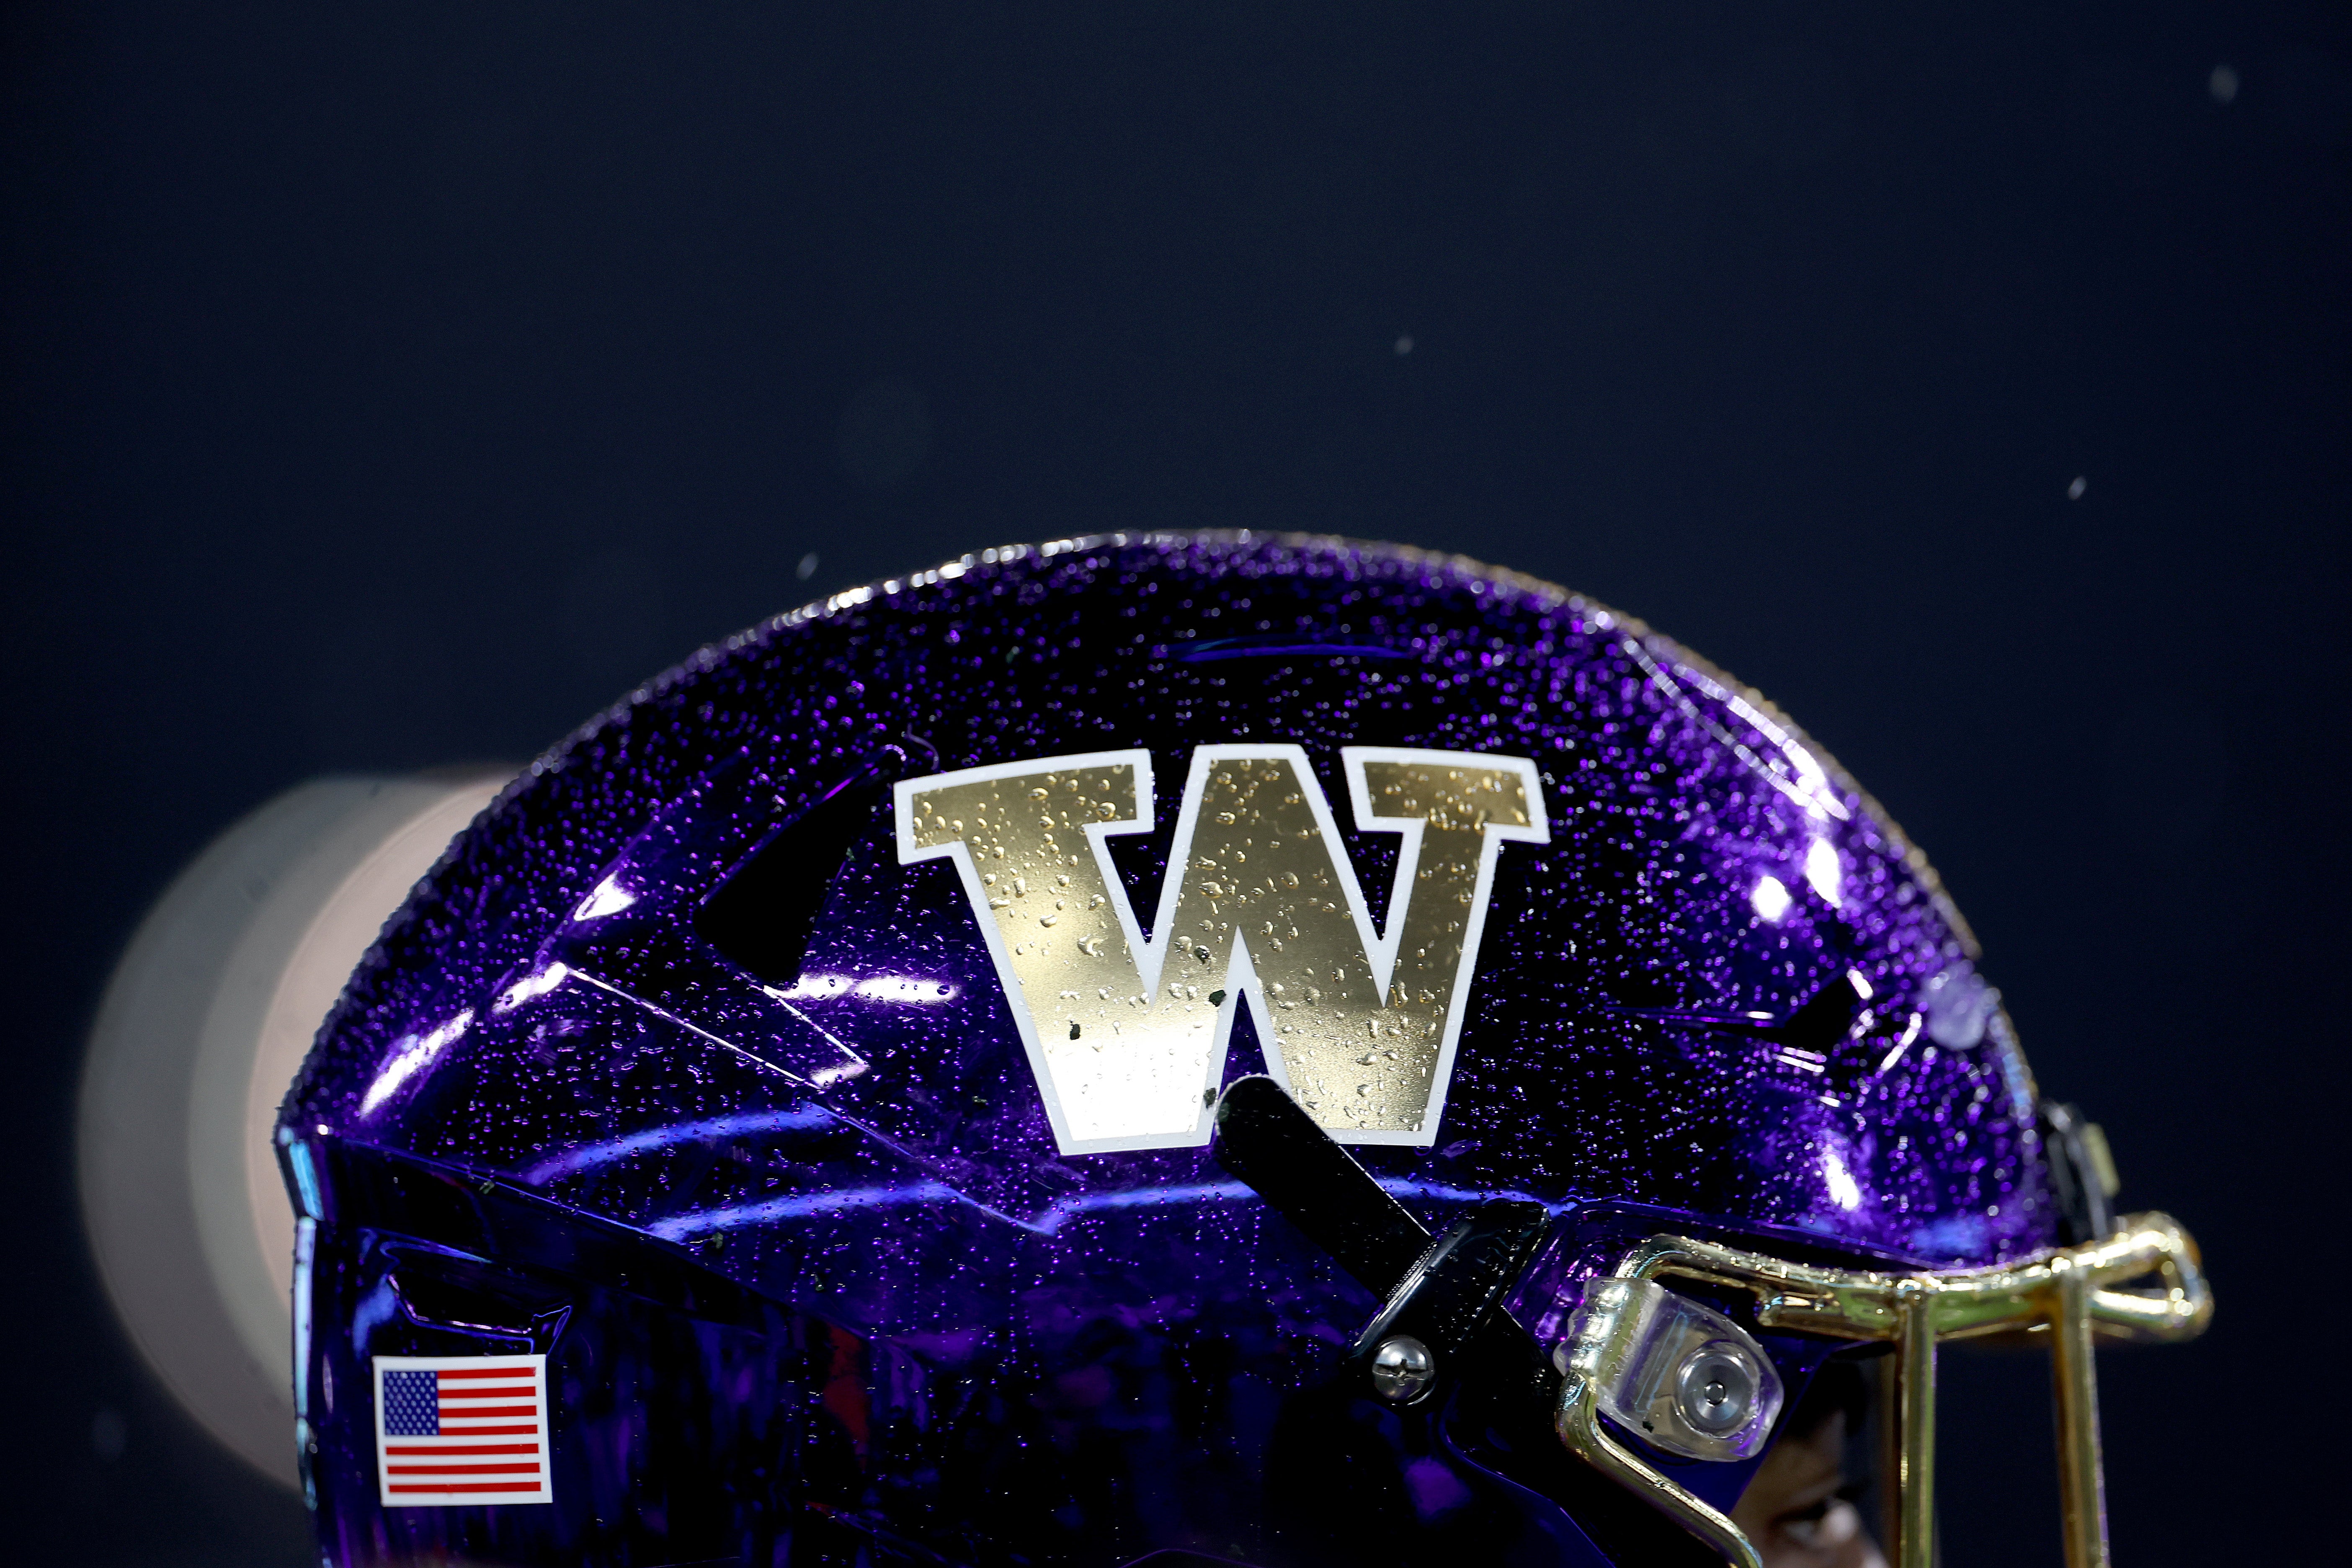 Washington Huskies were in the College Football play-offs